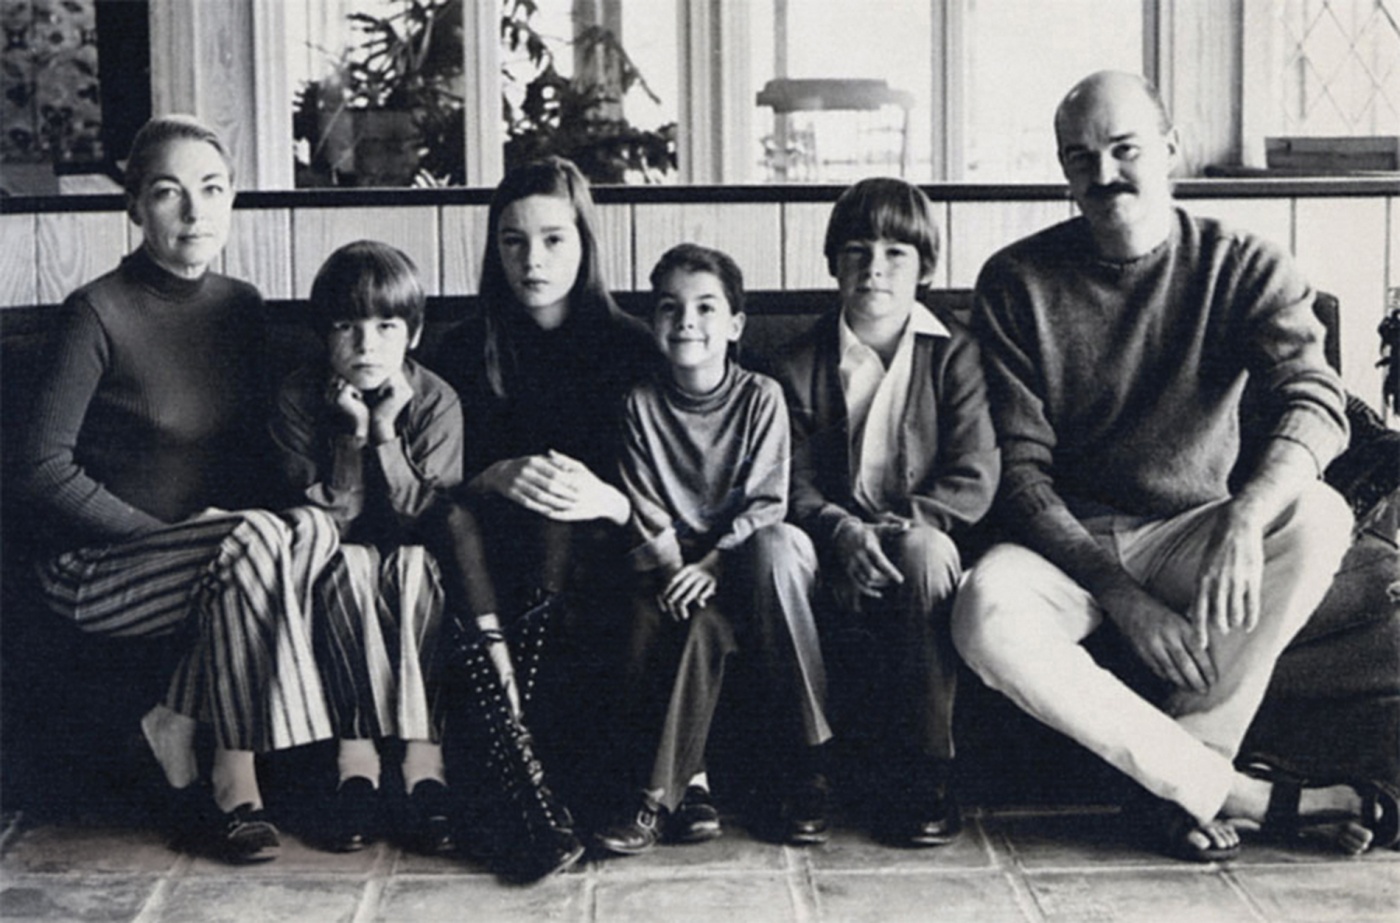 Richards (3rd from left) and family in Austin, 1970.